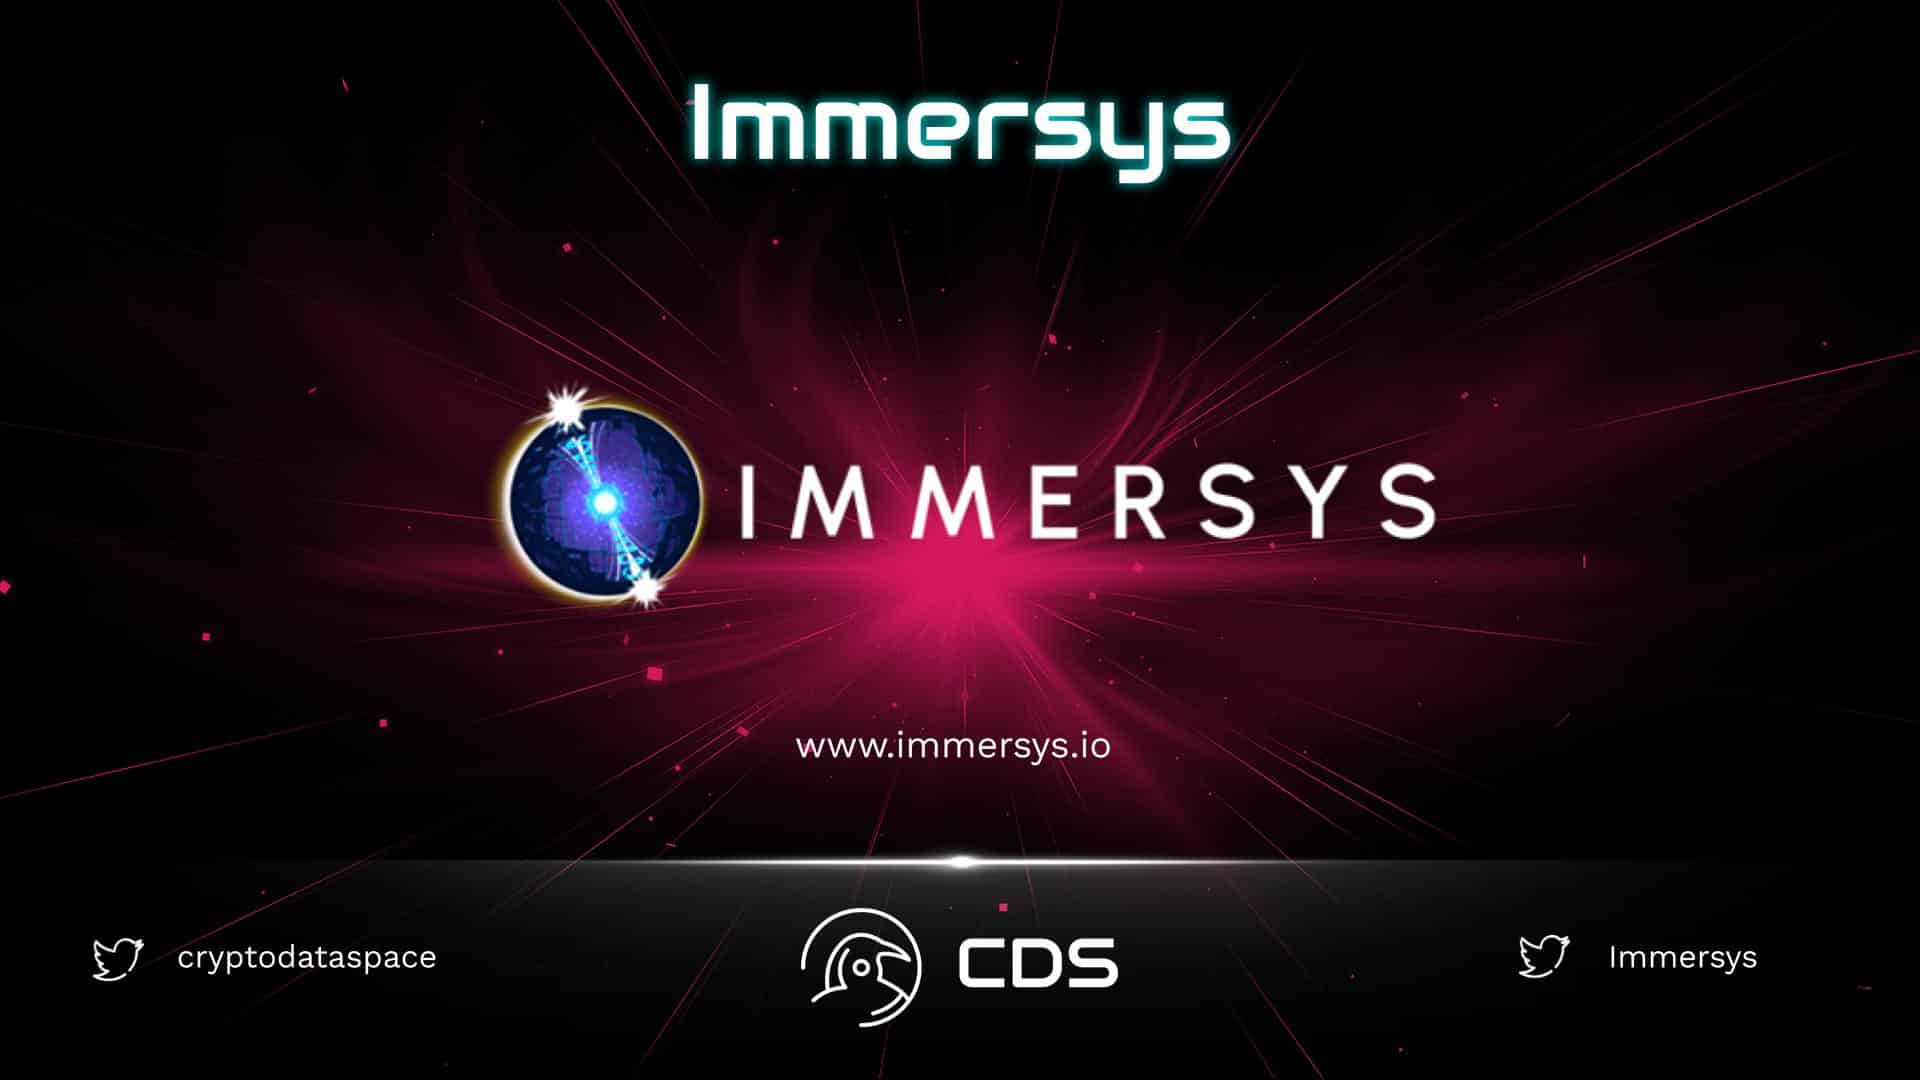 Immersys